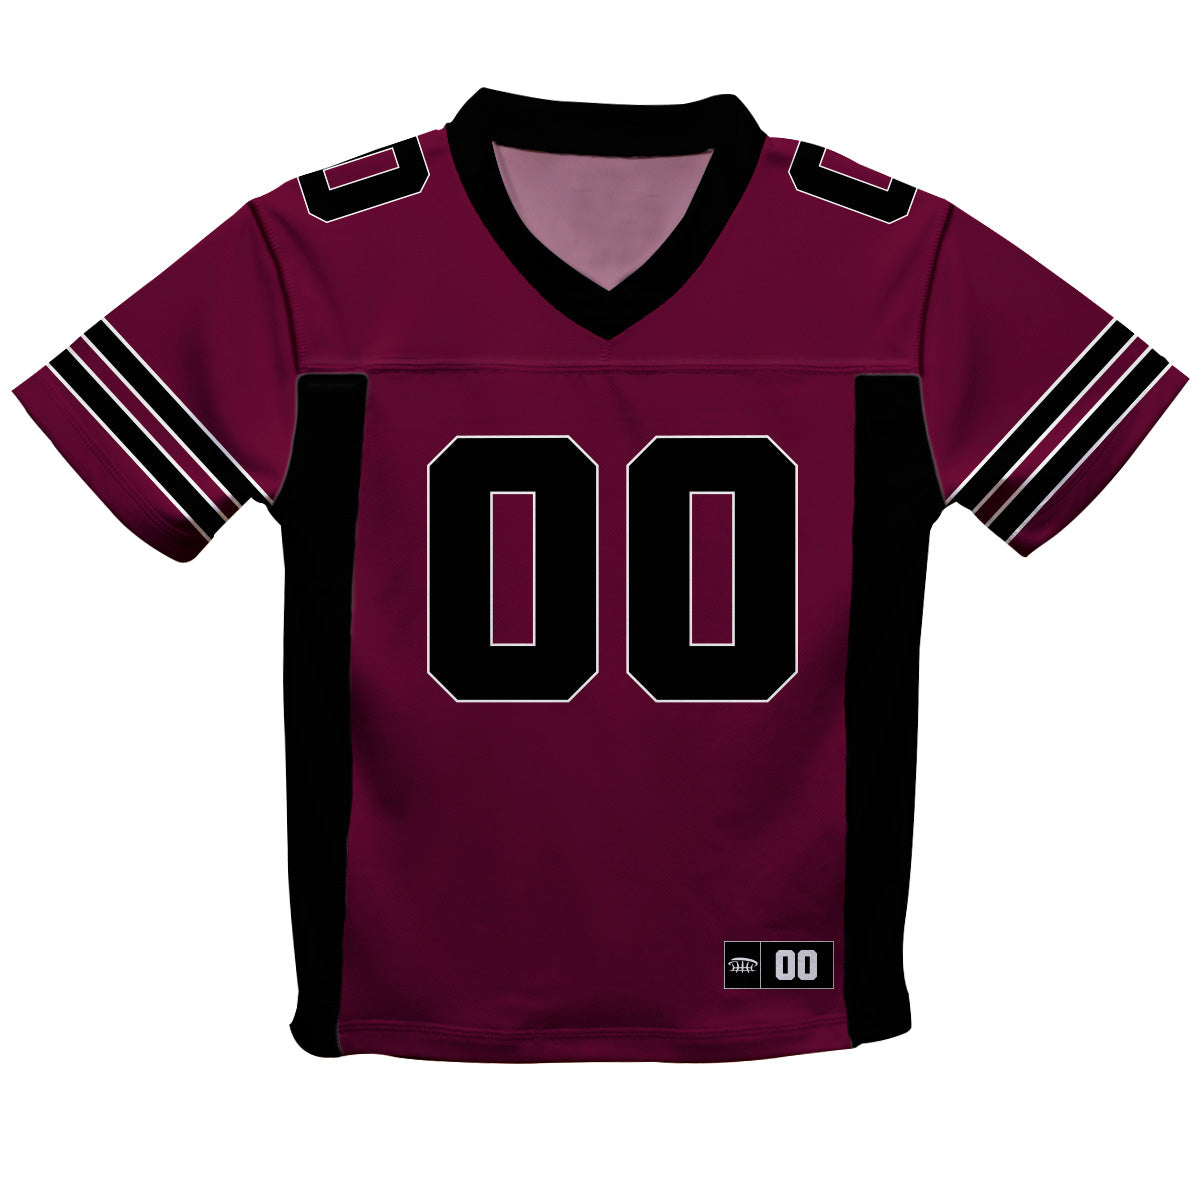 Personalized Name and Number Maroon and Black Fashion Football T-Shirt